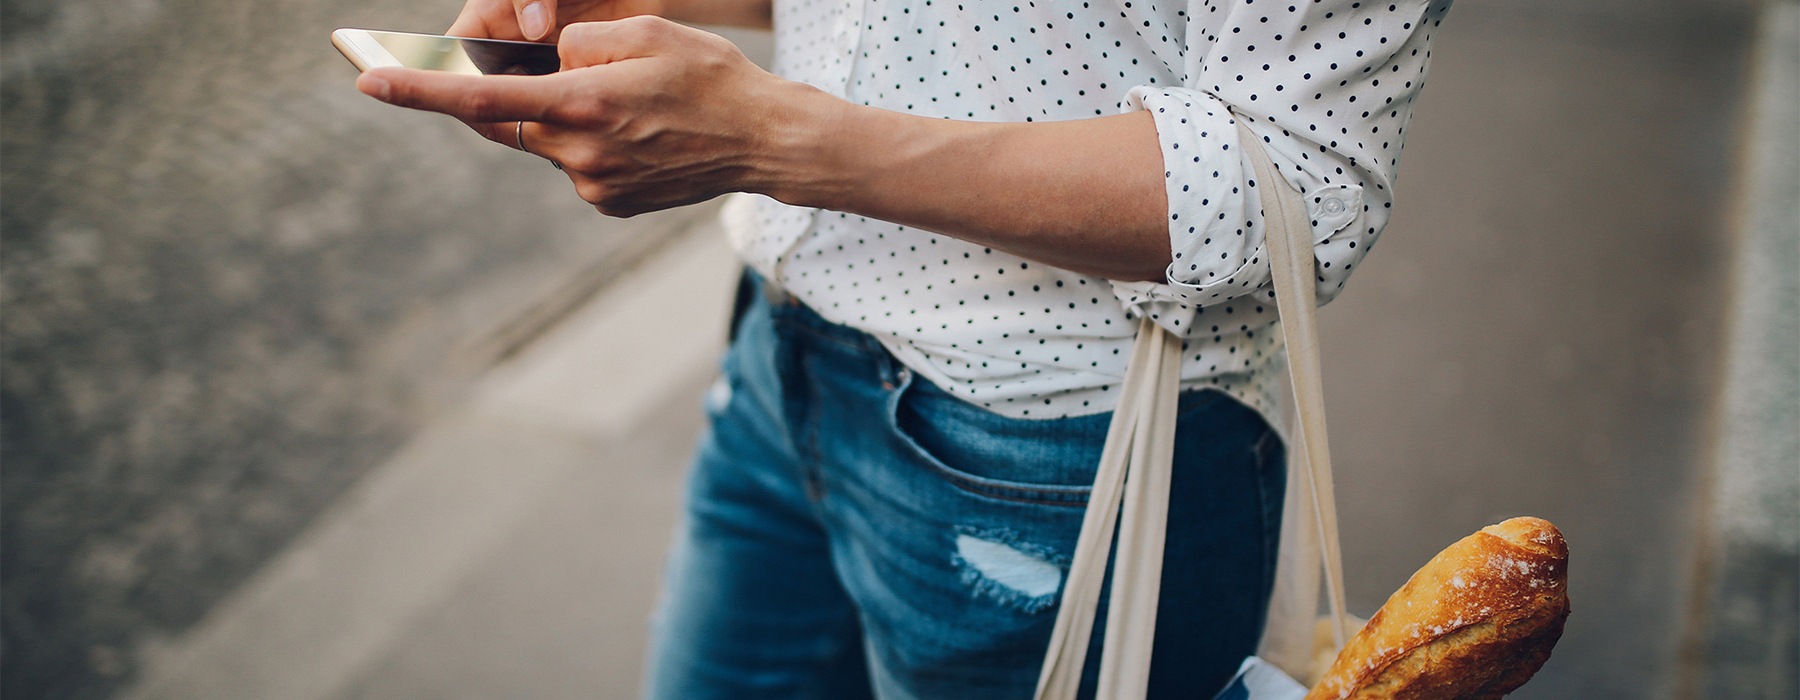 Woman on her phone while holding a bag with bread